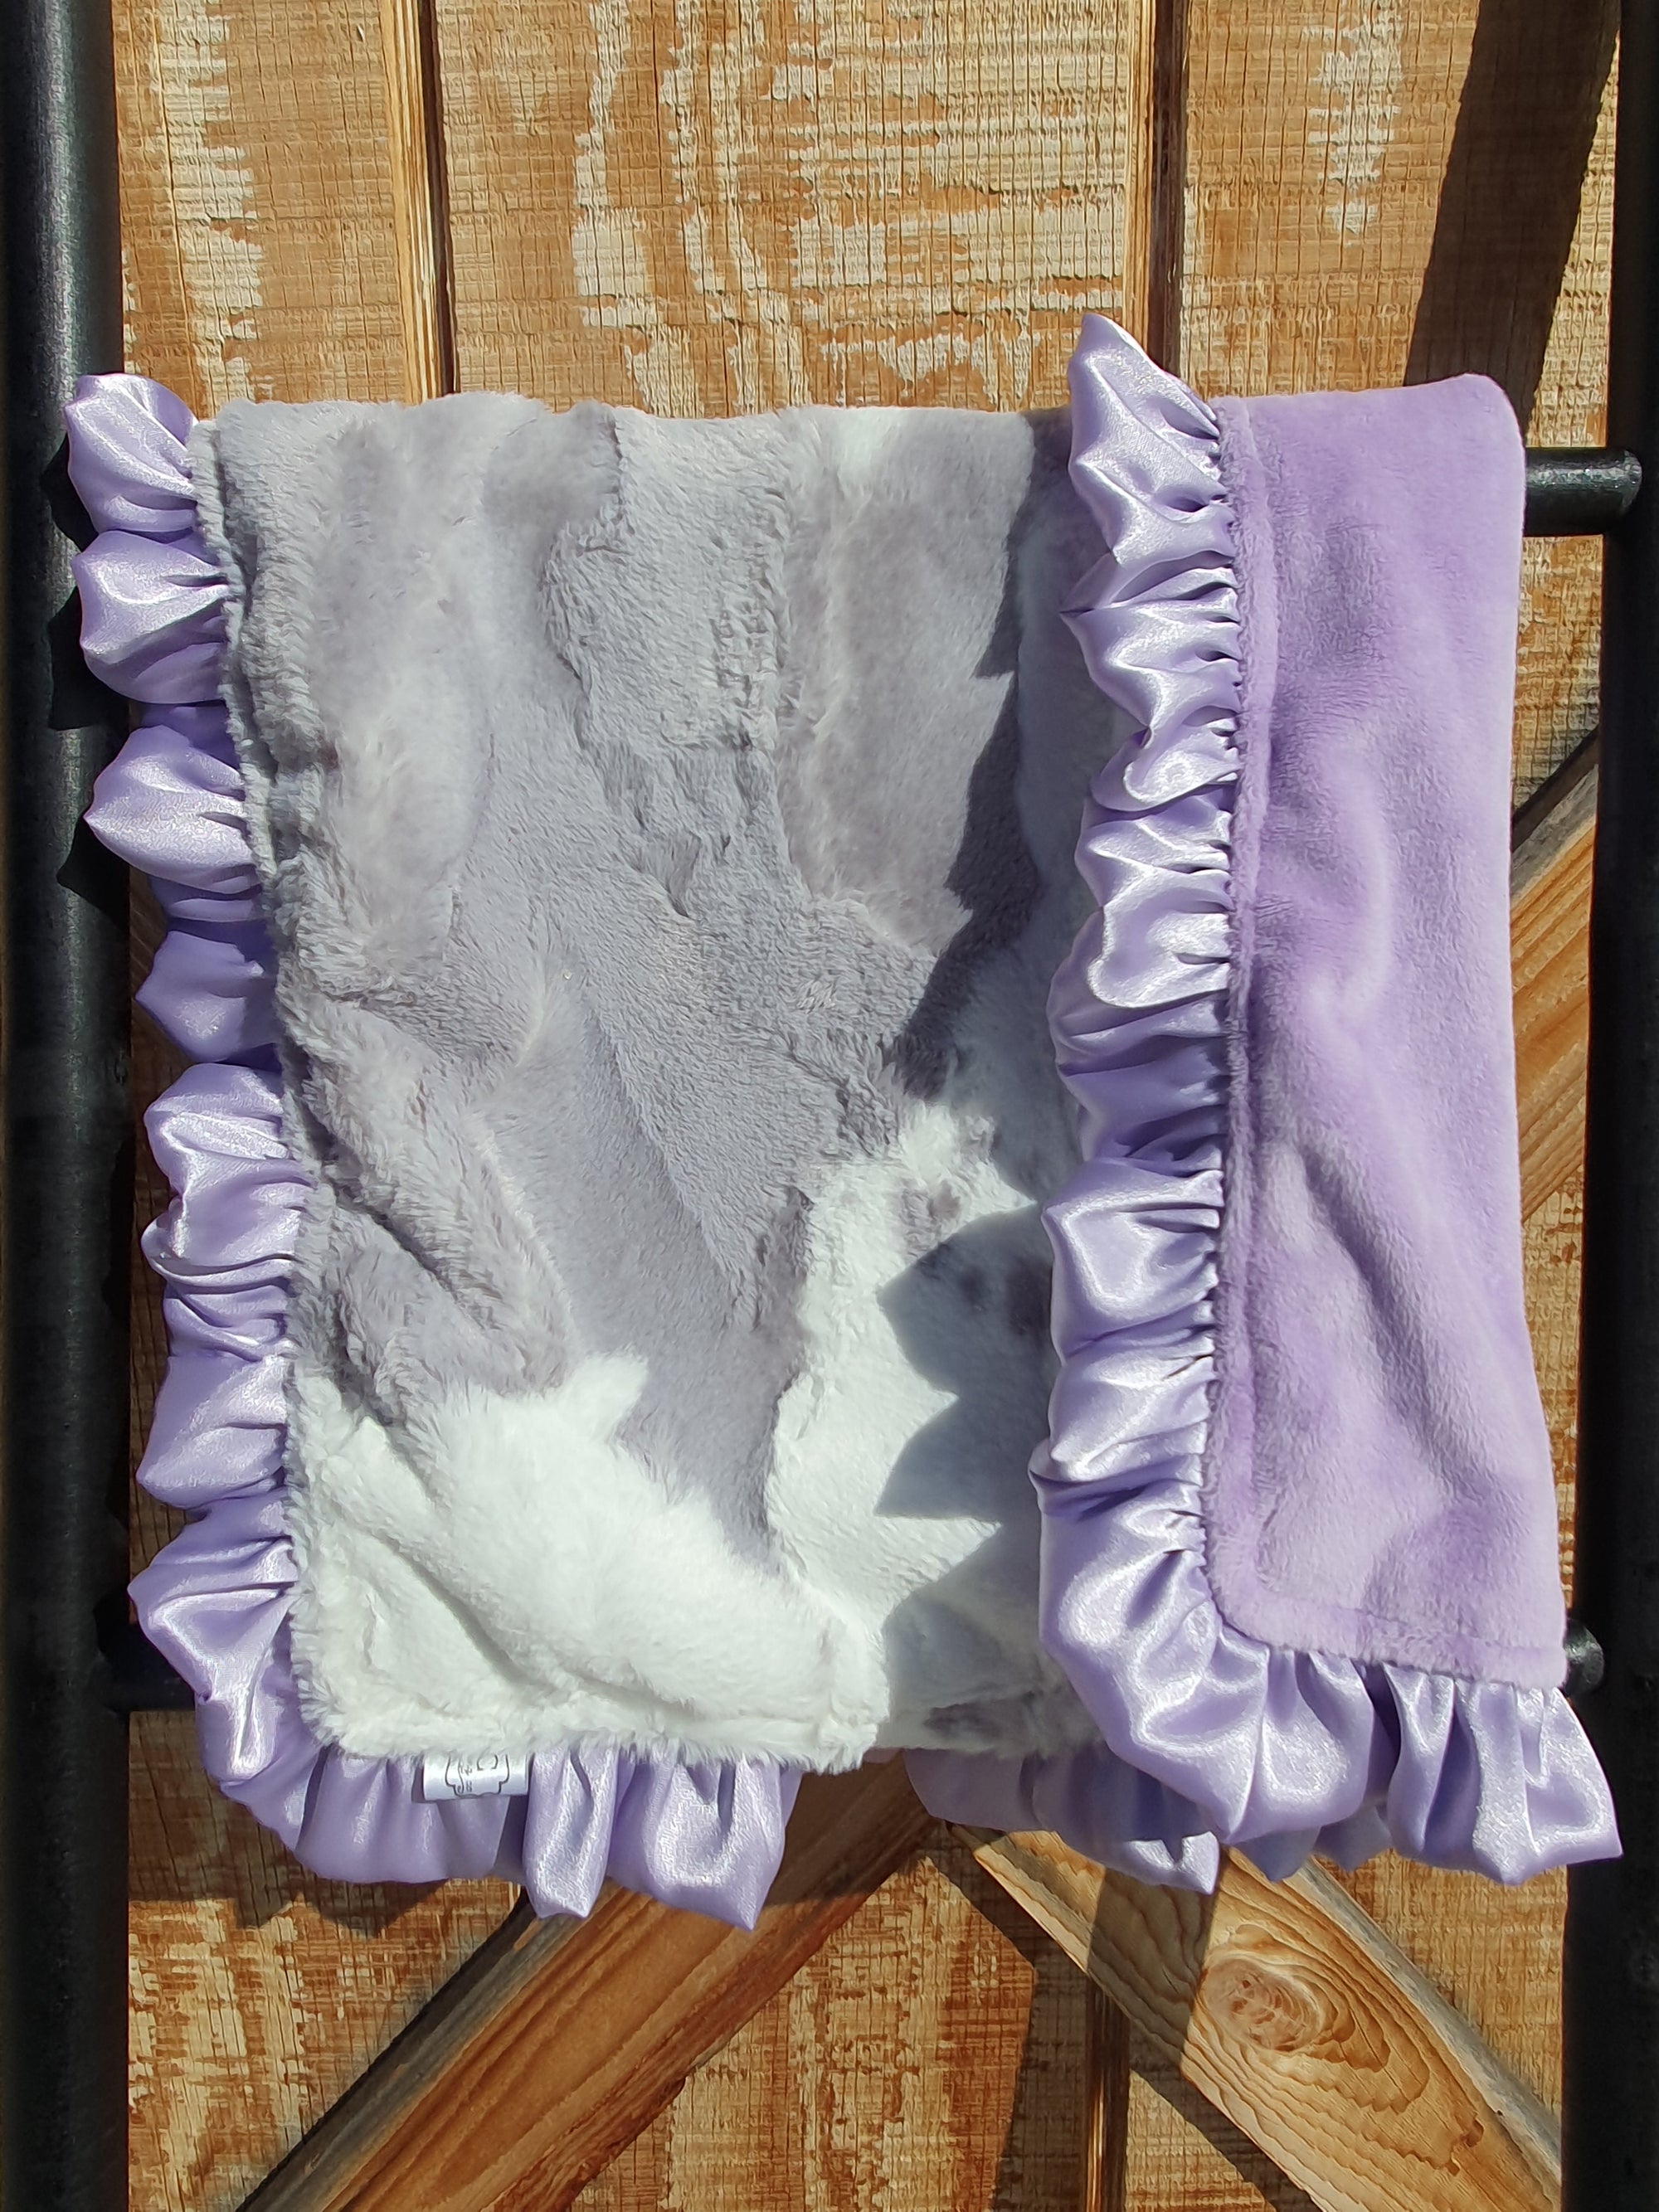 Live Blanket Sale - 18" Lovey Gray Calf and Lilac Minky - DBC Baby Bedding Co 